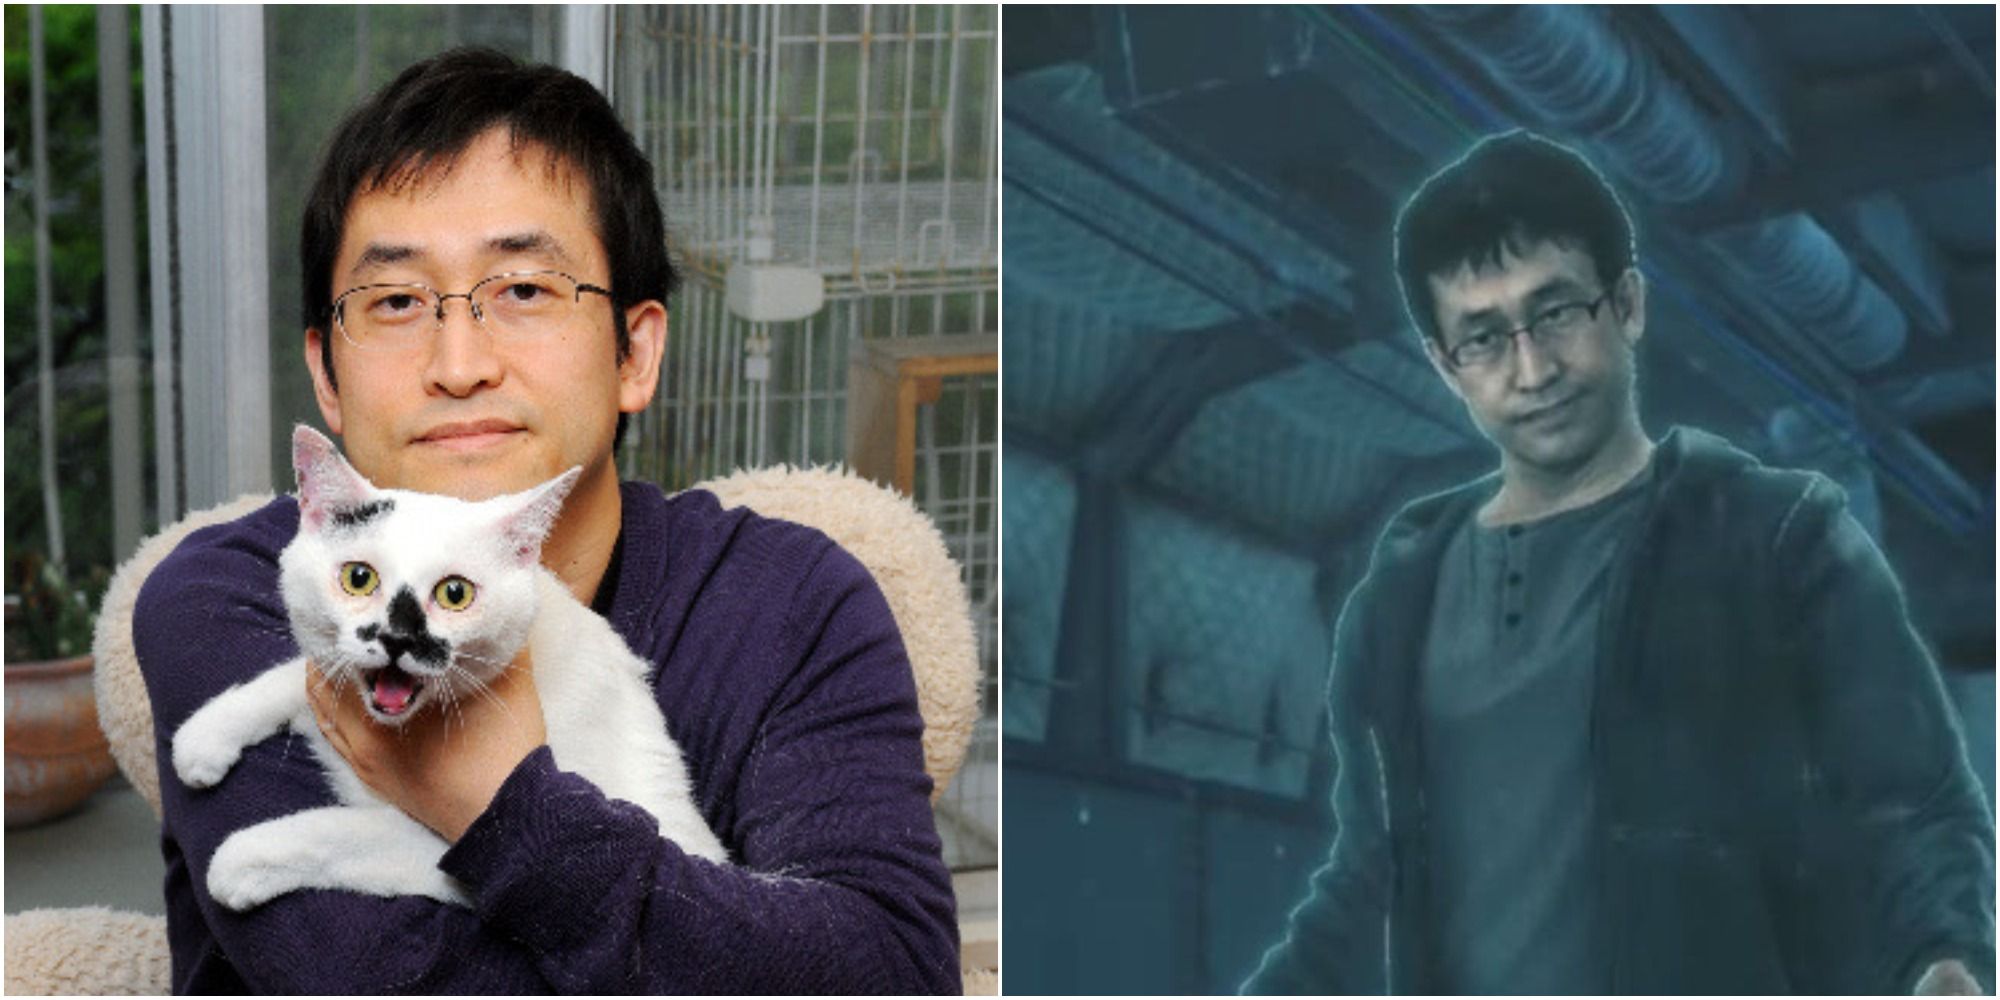 DS Junji Ito Cameo real life portrait and in game hologram